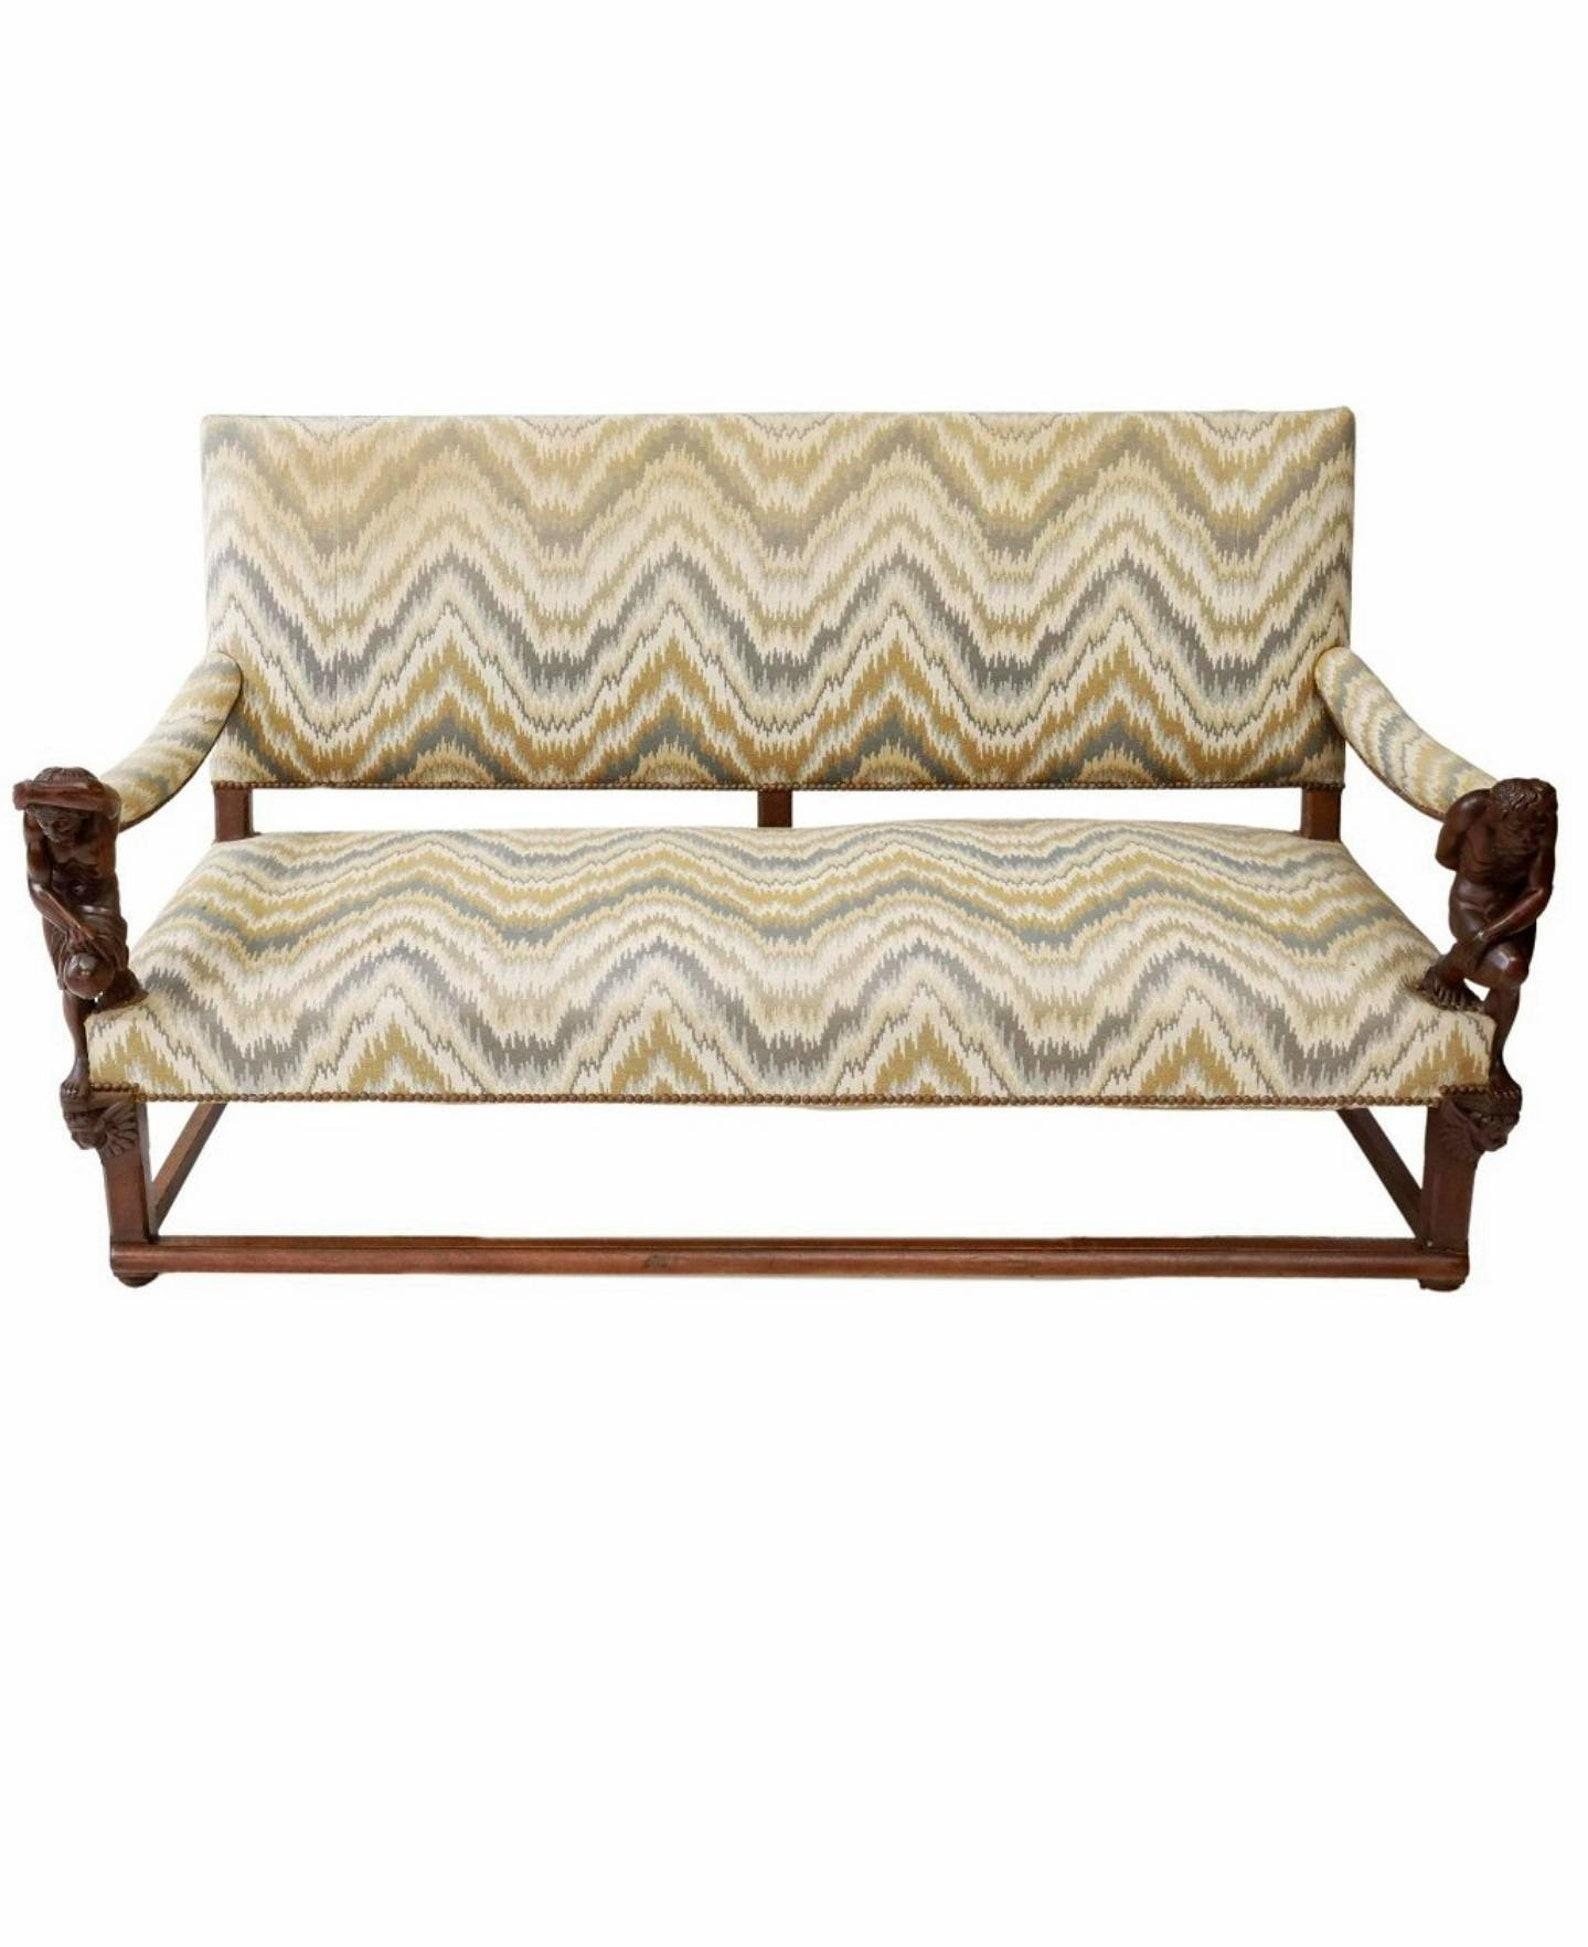 19th Century French Atlas Figural Carved Walnut Upholstered Settee For Sale 2